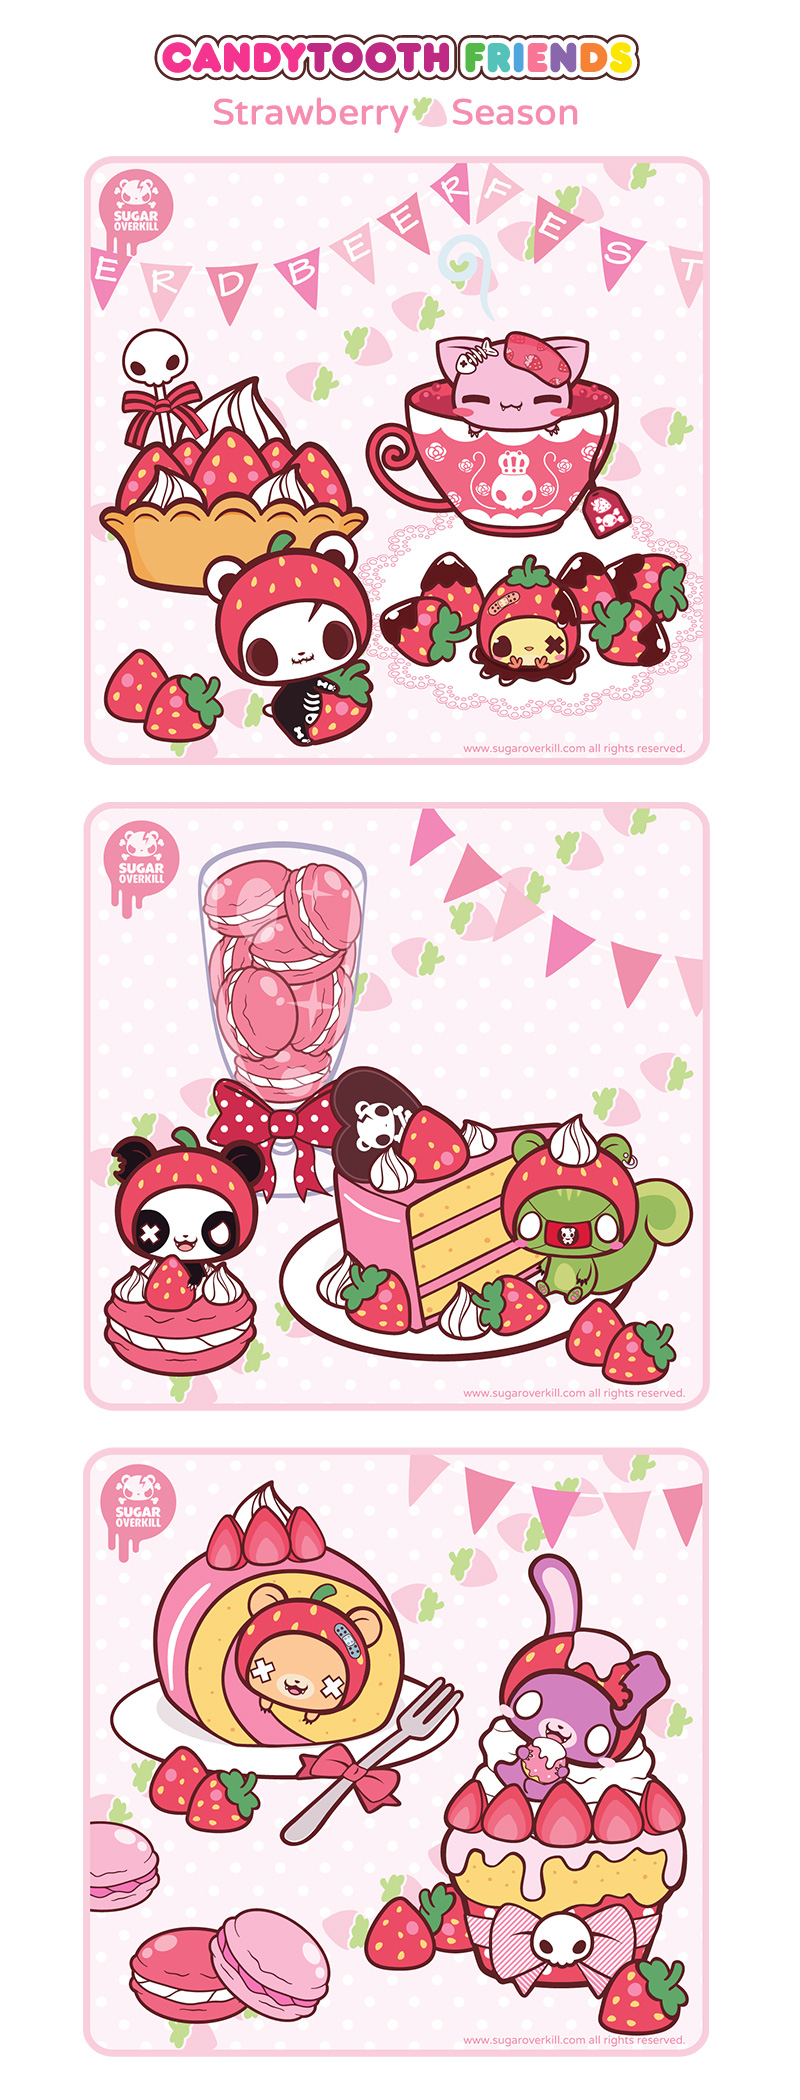 Candytooth_Friends_Strawberry_Season_by_SugarOverkill